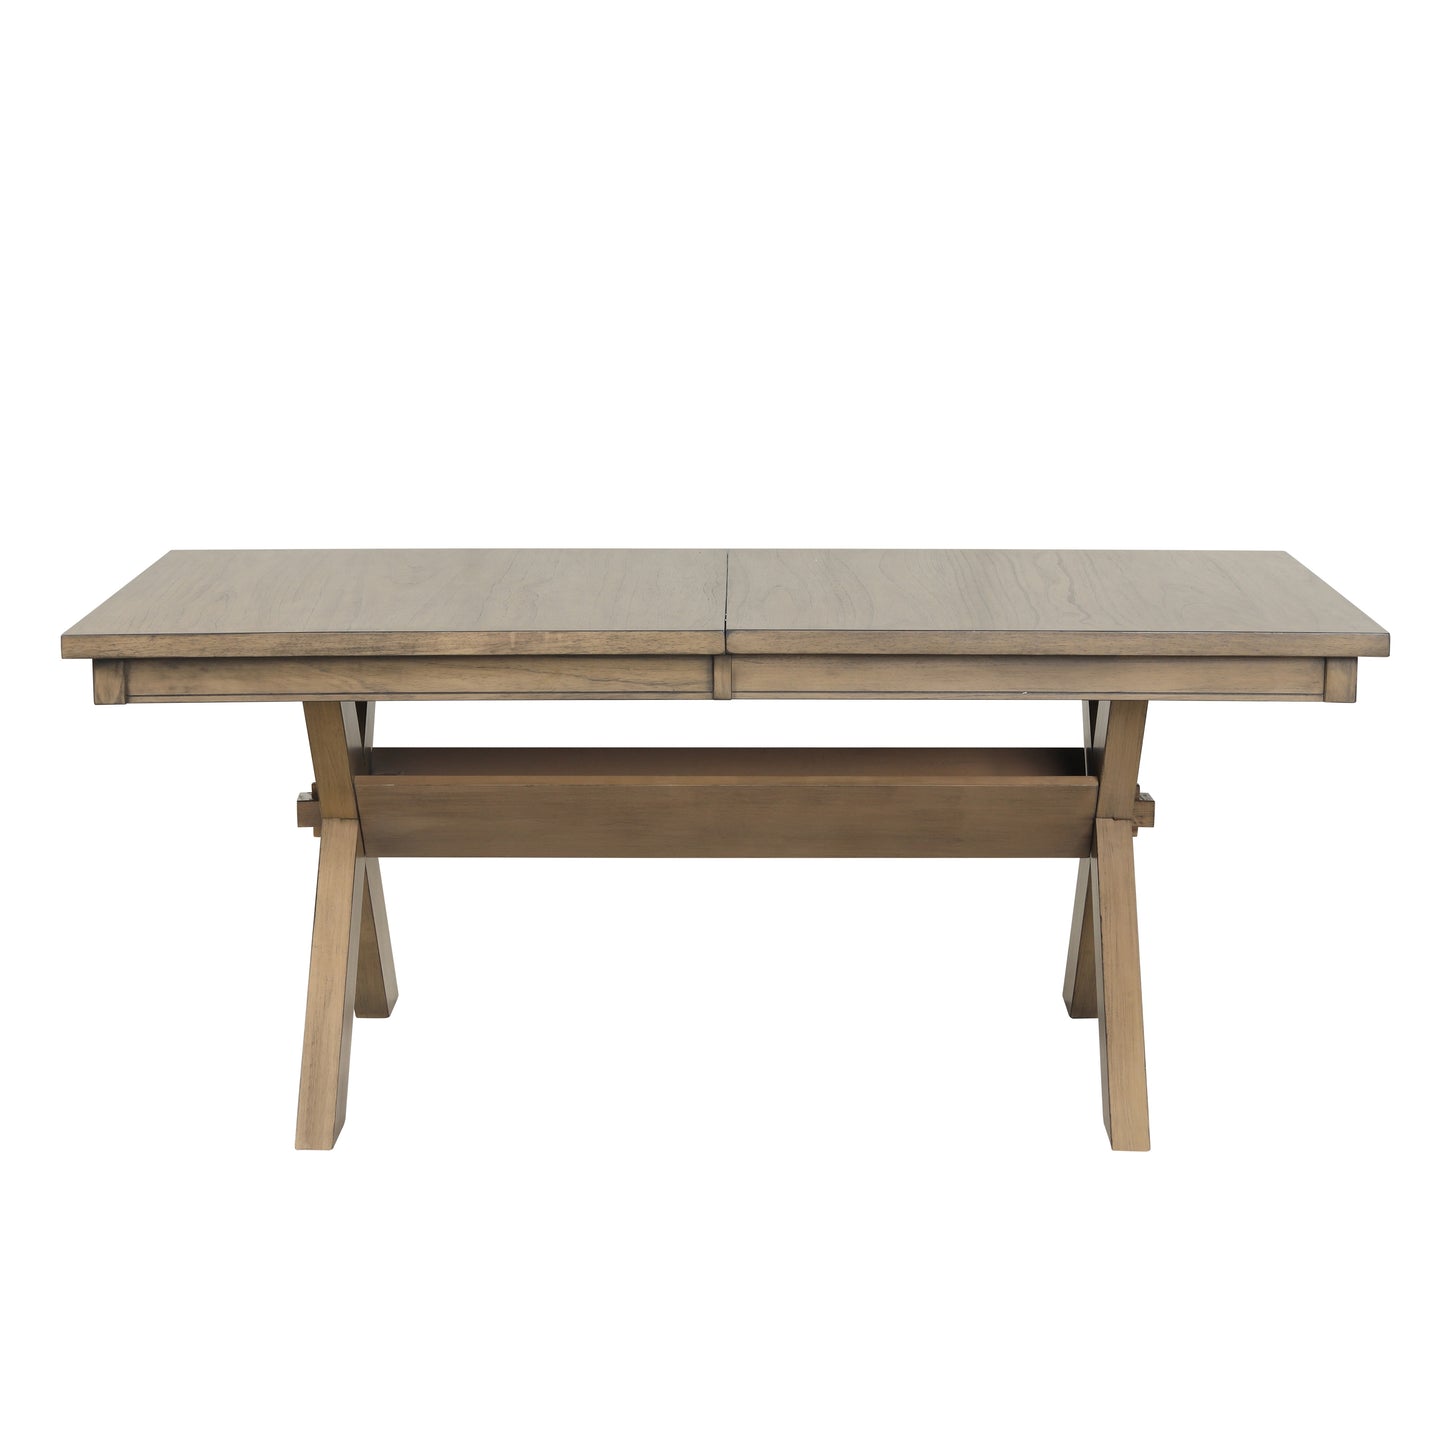 Raven Wood Trestle Extendable Dining Table with Leaf, Glazed Pine Brown